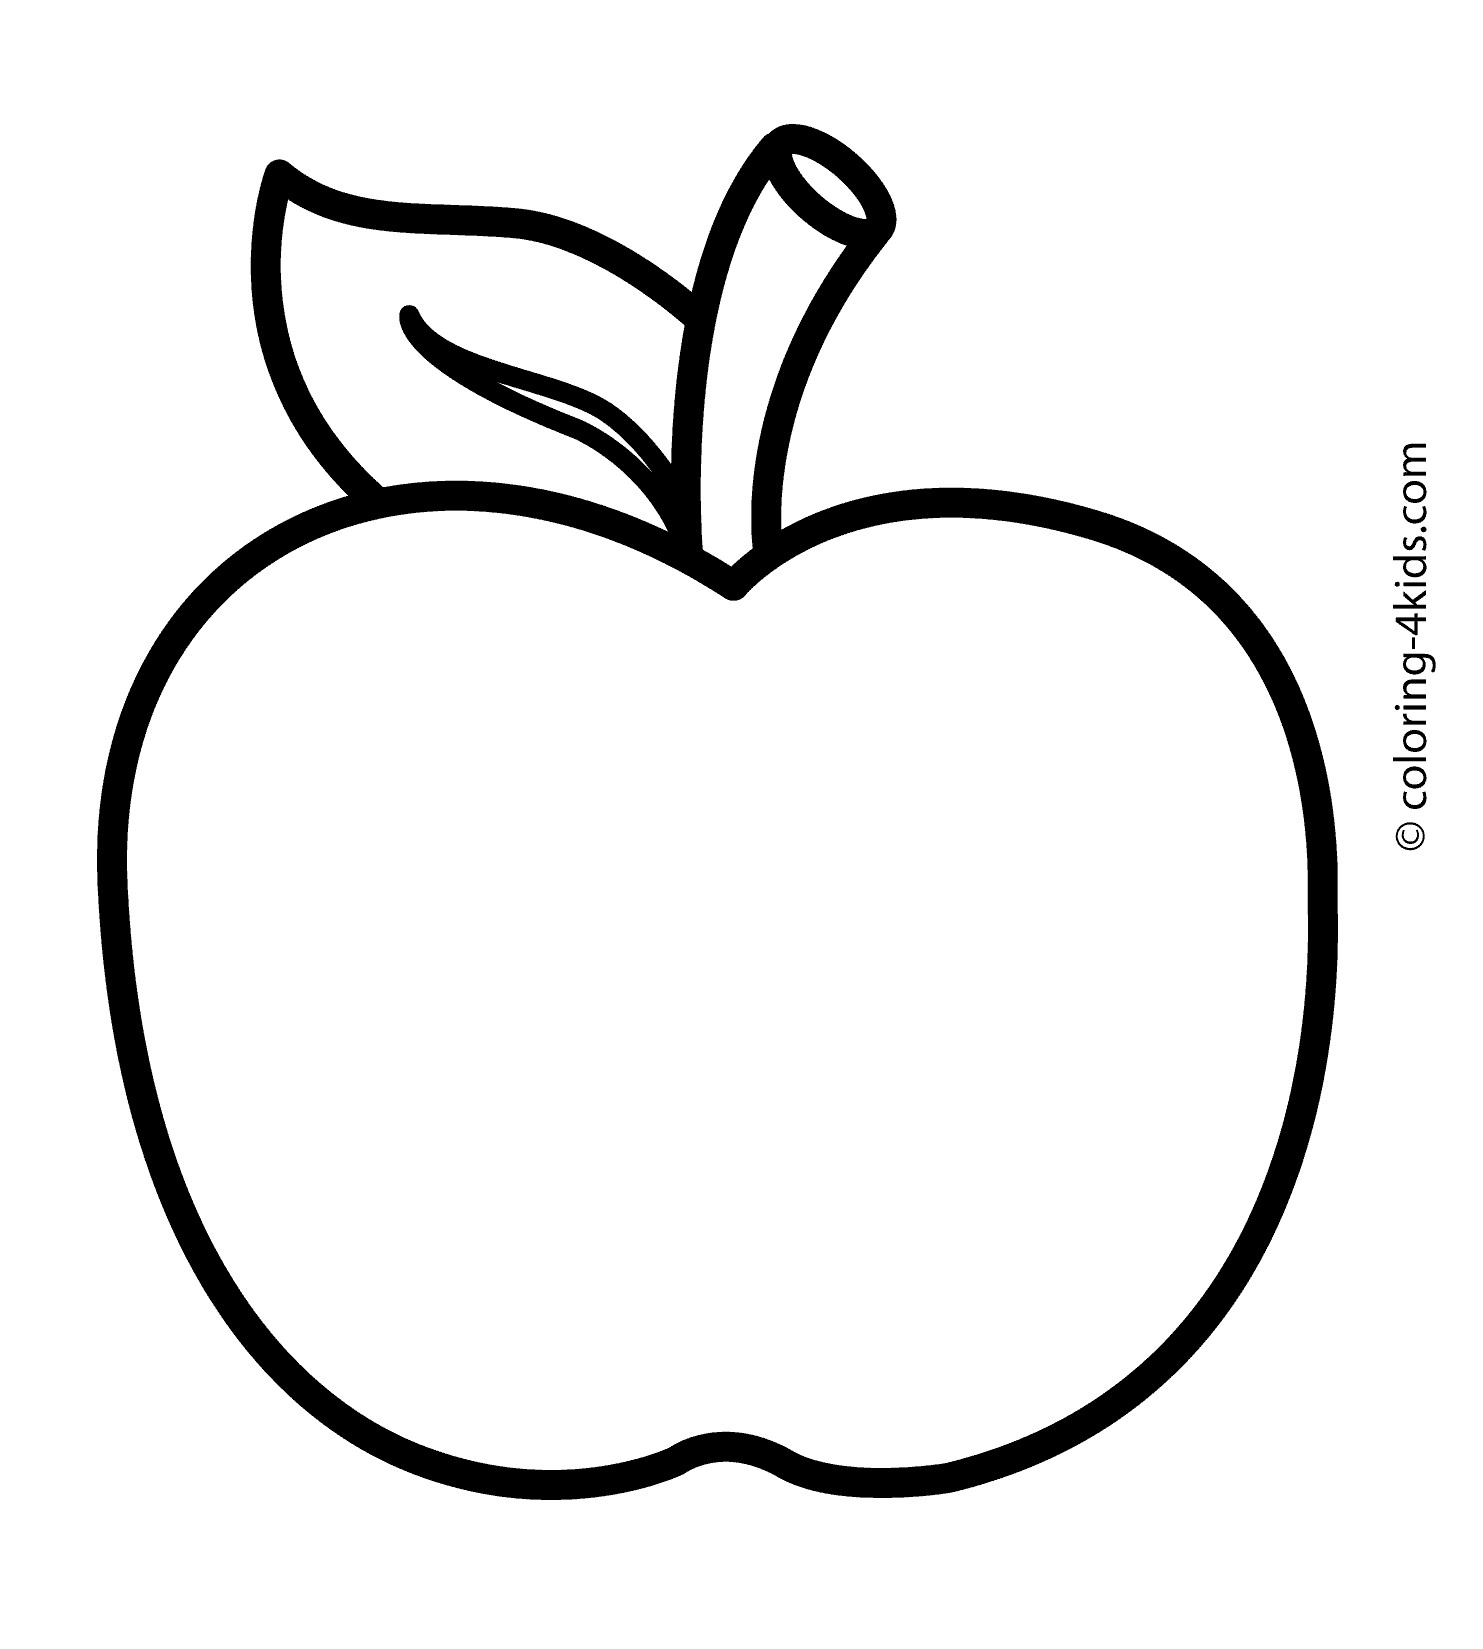 Apple clipart printable, Picture #228861 apple clipart printable.